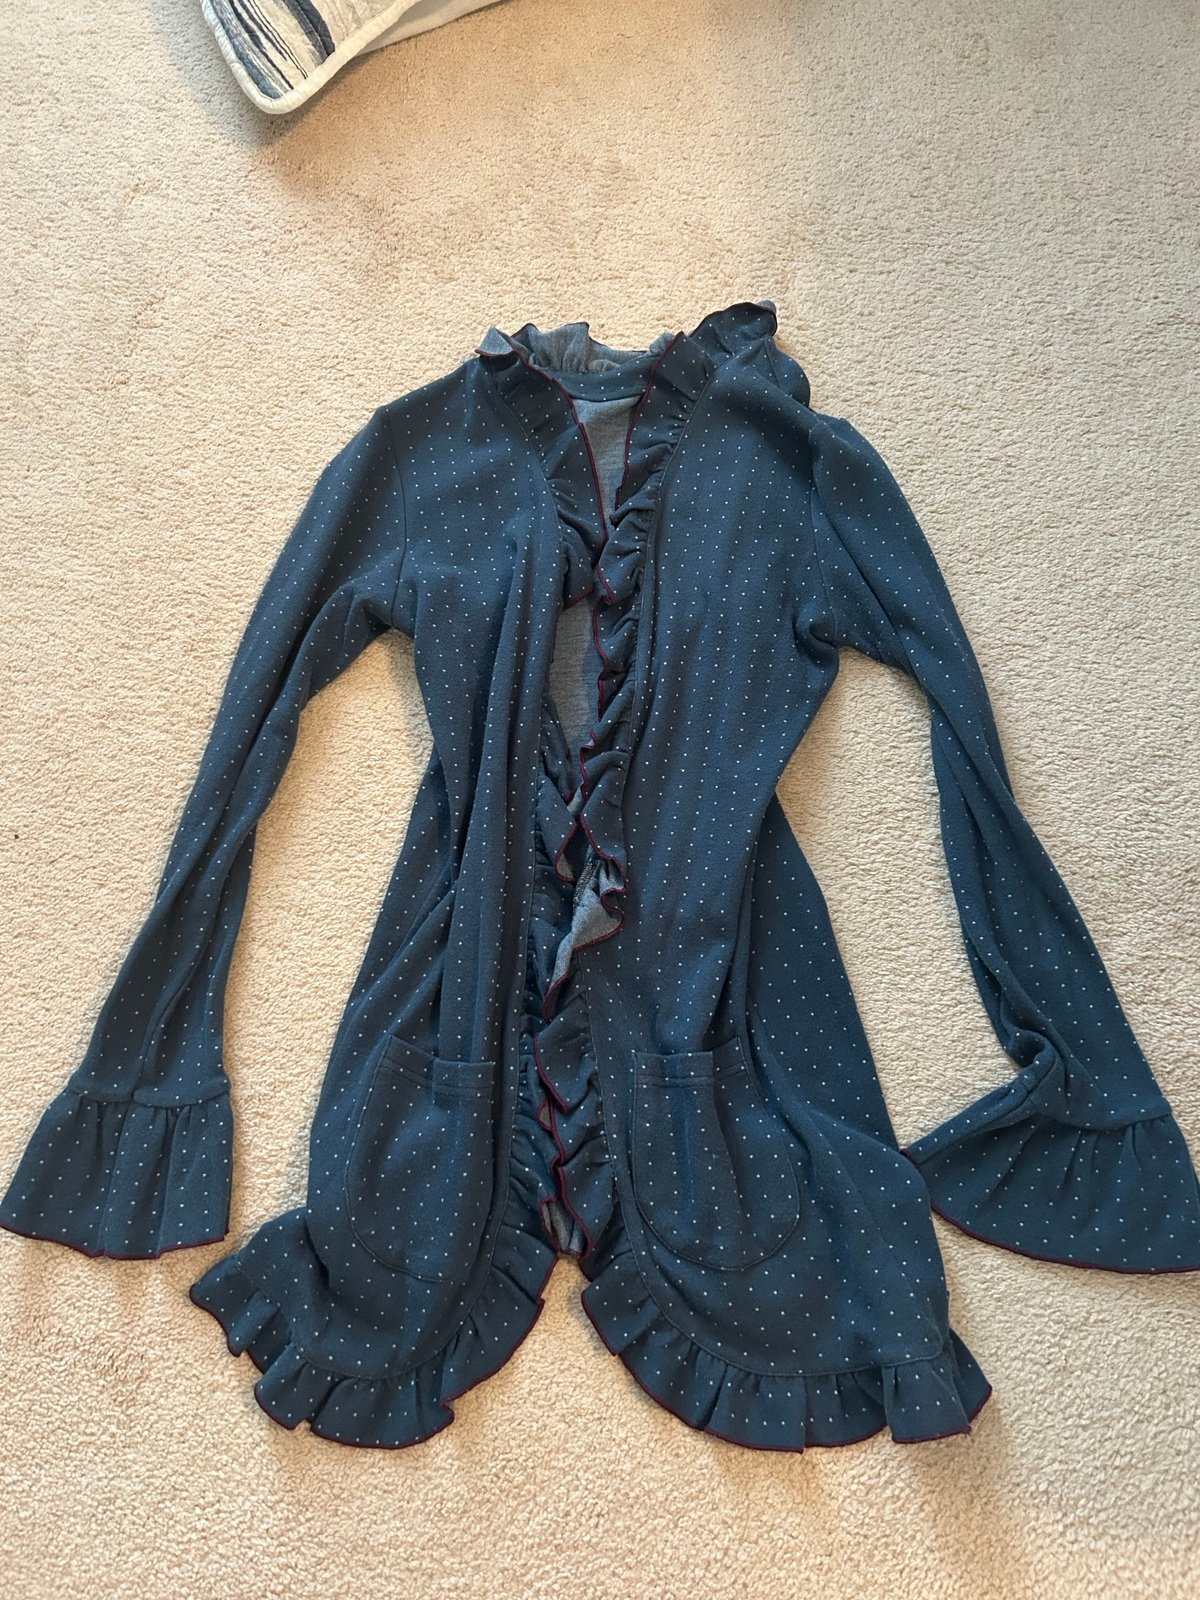 cheapest place to buy  Matilda Jane cardigan HFfQ3UwAa Outlet Store